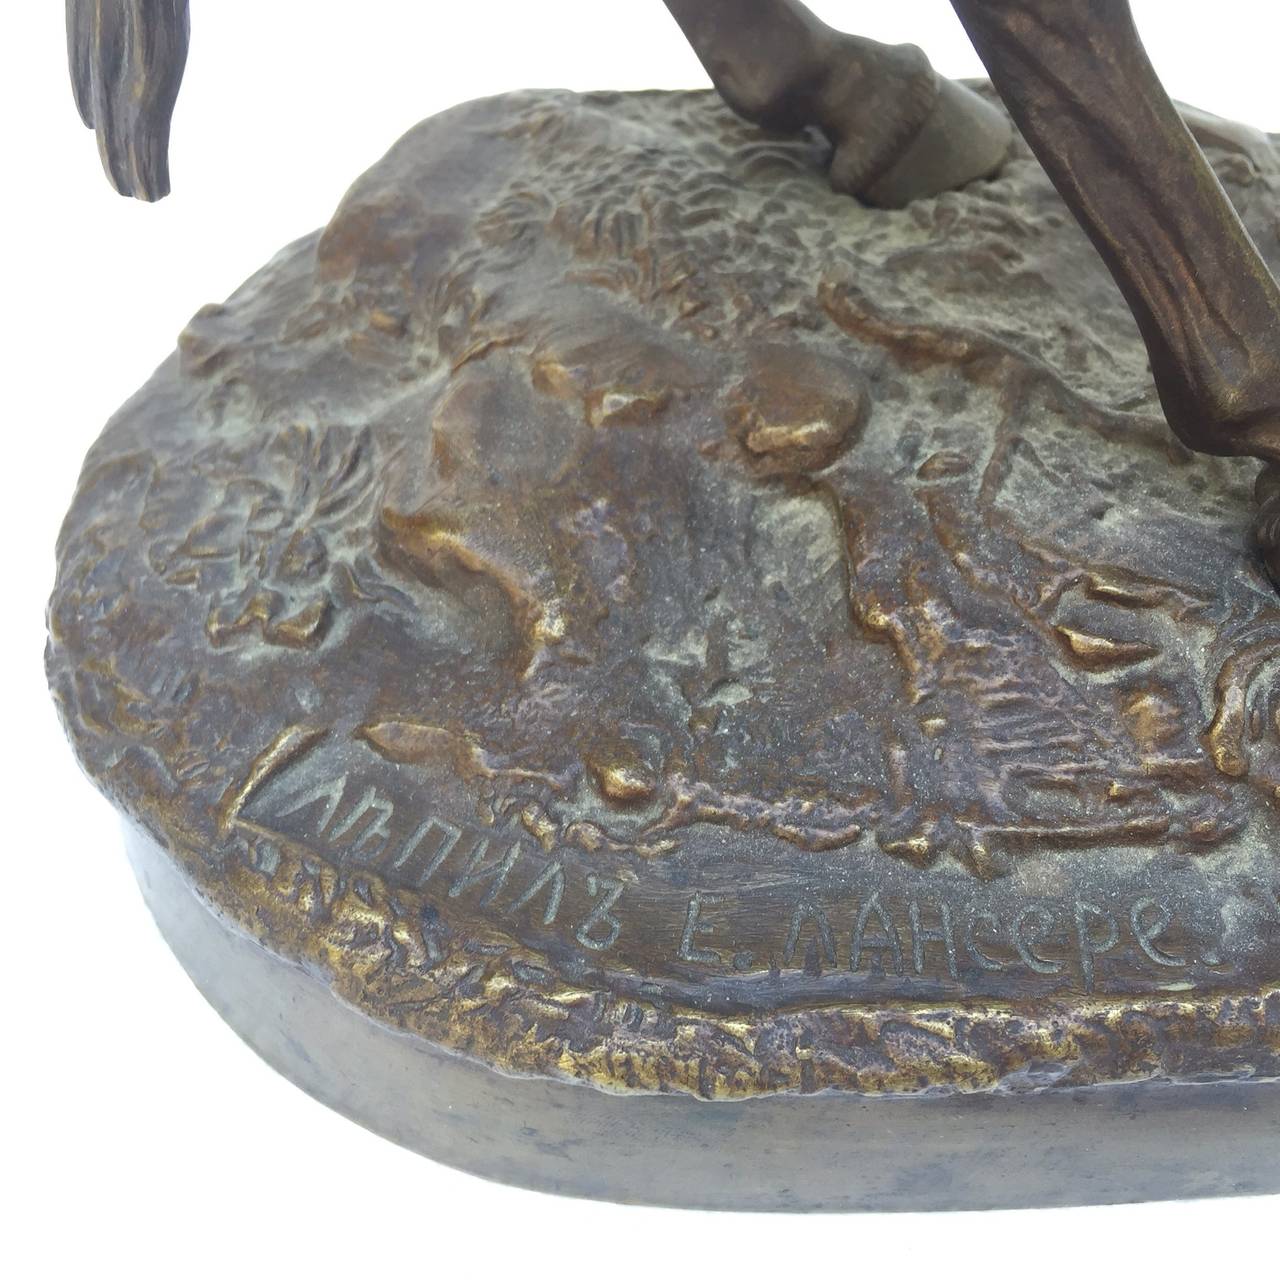 This is a beautiful original bronze casting by the foremost Russian sculptor of his day Evgeny Lanceray. Artist signed on the base in Cyrillic (image 5) and is also inscribed on the base with the Russian foundry Shtange mark (image 6)(. The piece